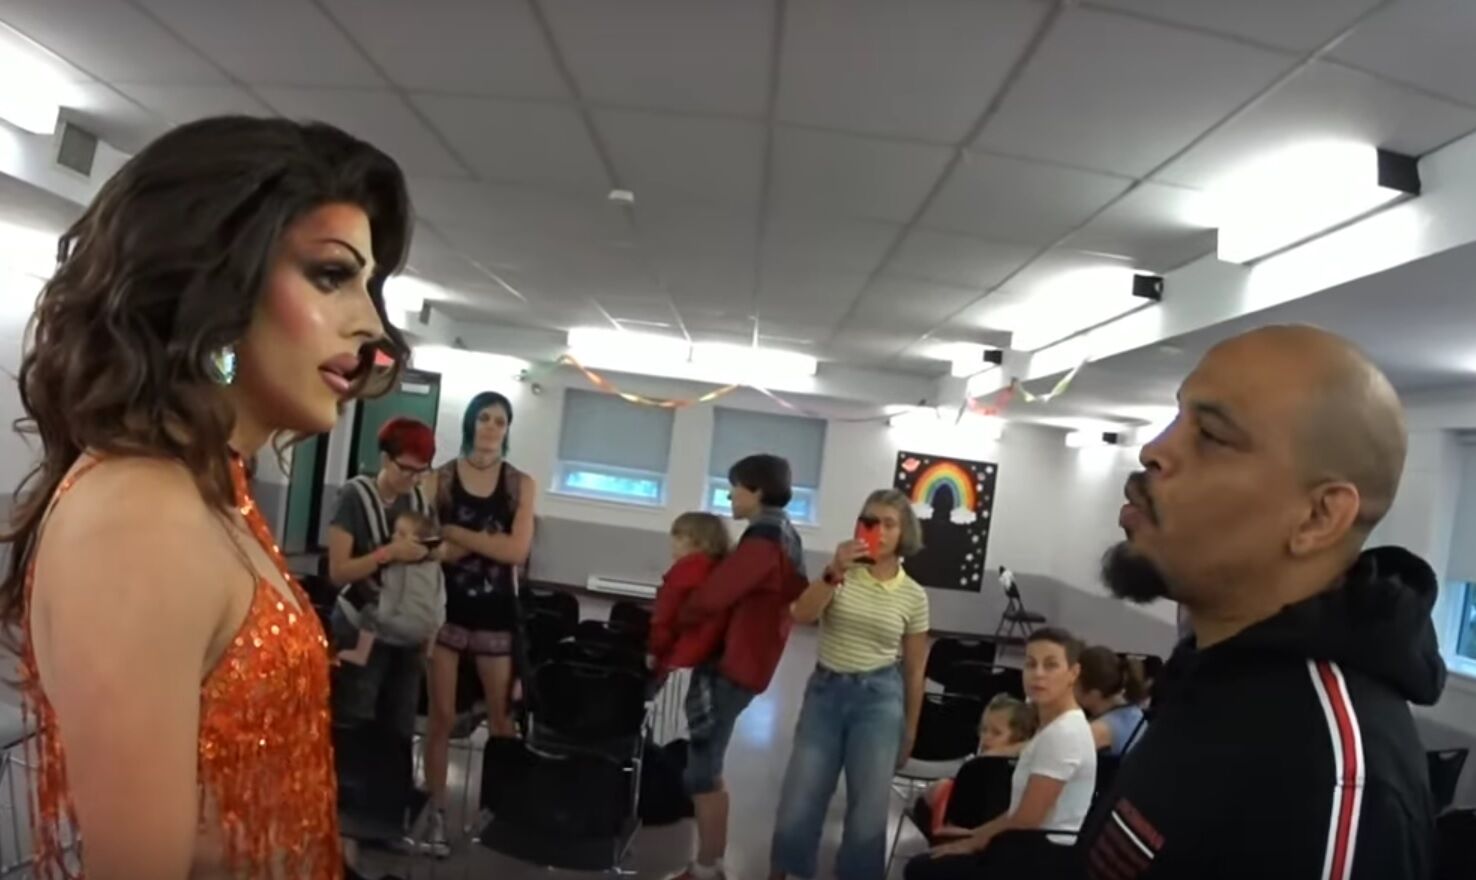 The Drag Queen and the hater face off at Drag Queen Story Hour